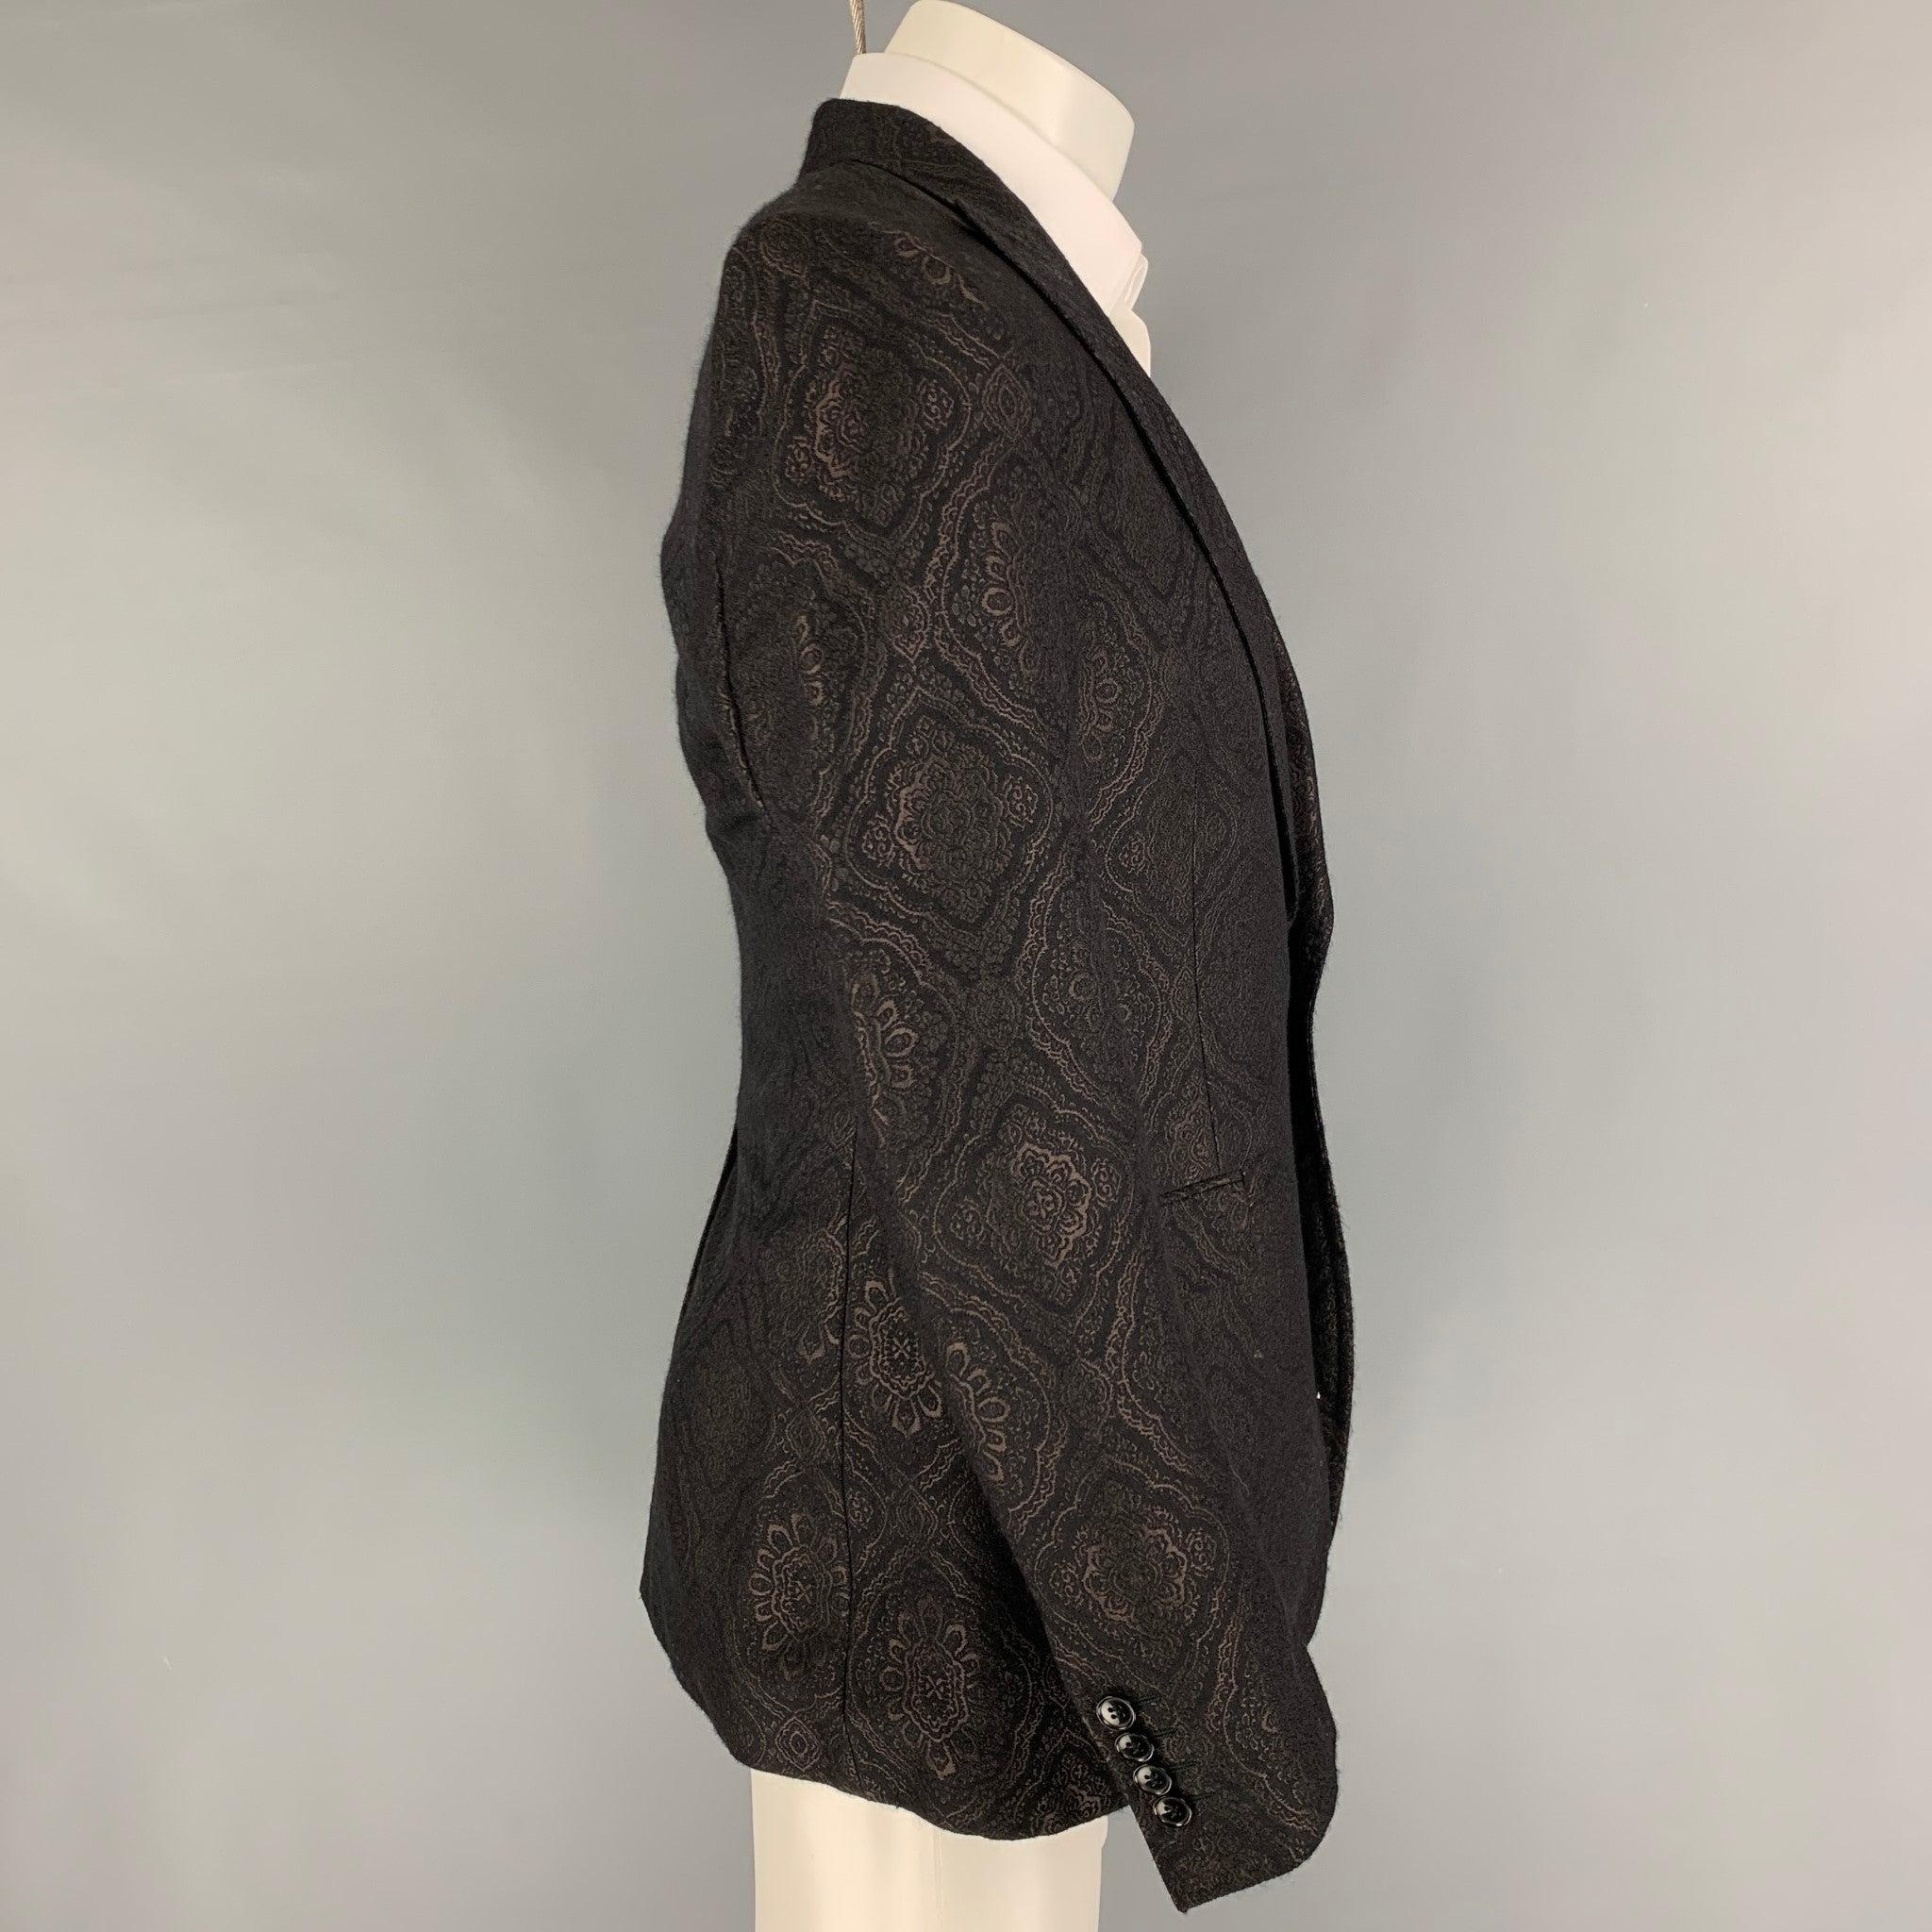 DOLCE & GABBANA Size 38 Black Brown Jacquard Wool Peak Lapel Sport Coat In Good Condition For Sale In San Francisco, CA